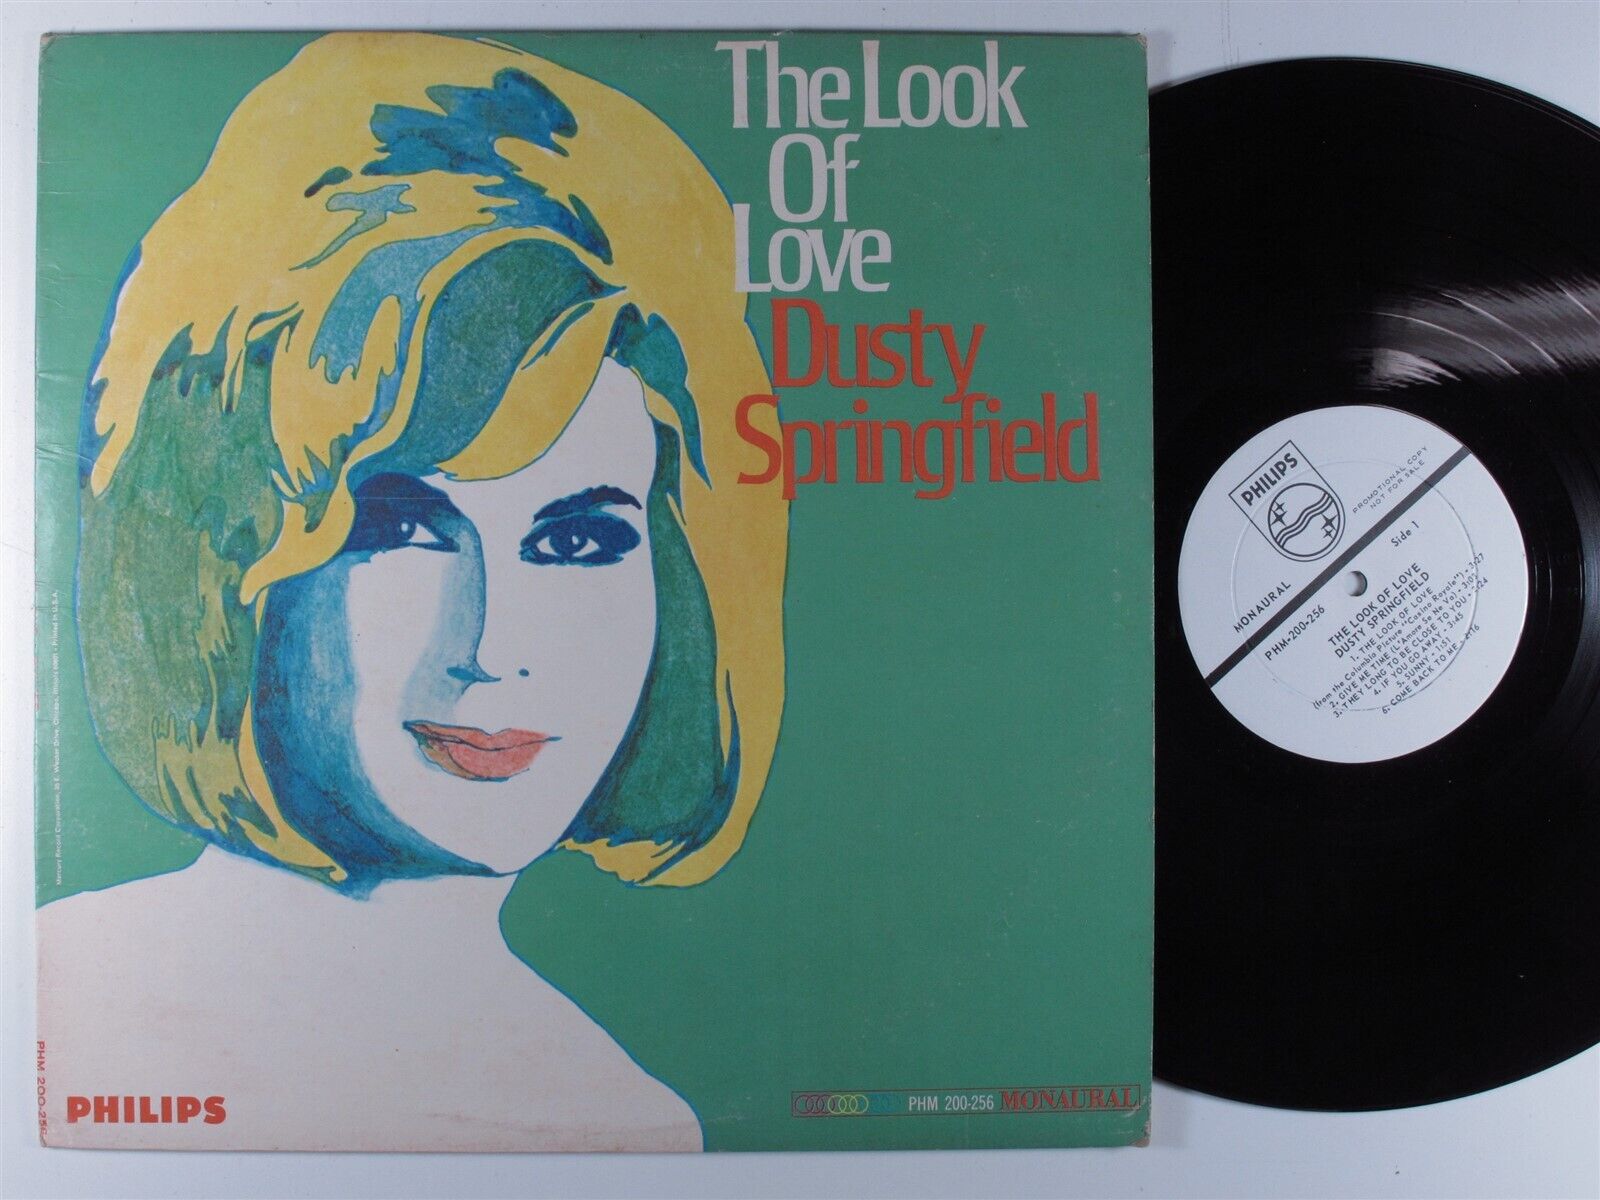 DUSTY SPRINGFIELD The Look Of Love PHILIPS LP VG+ mono wlp j